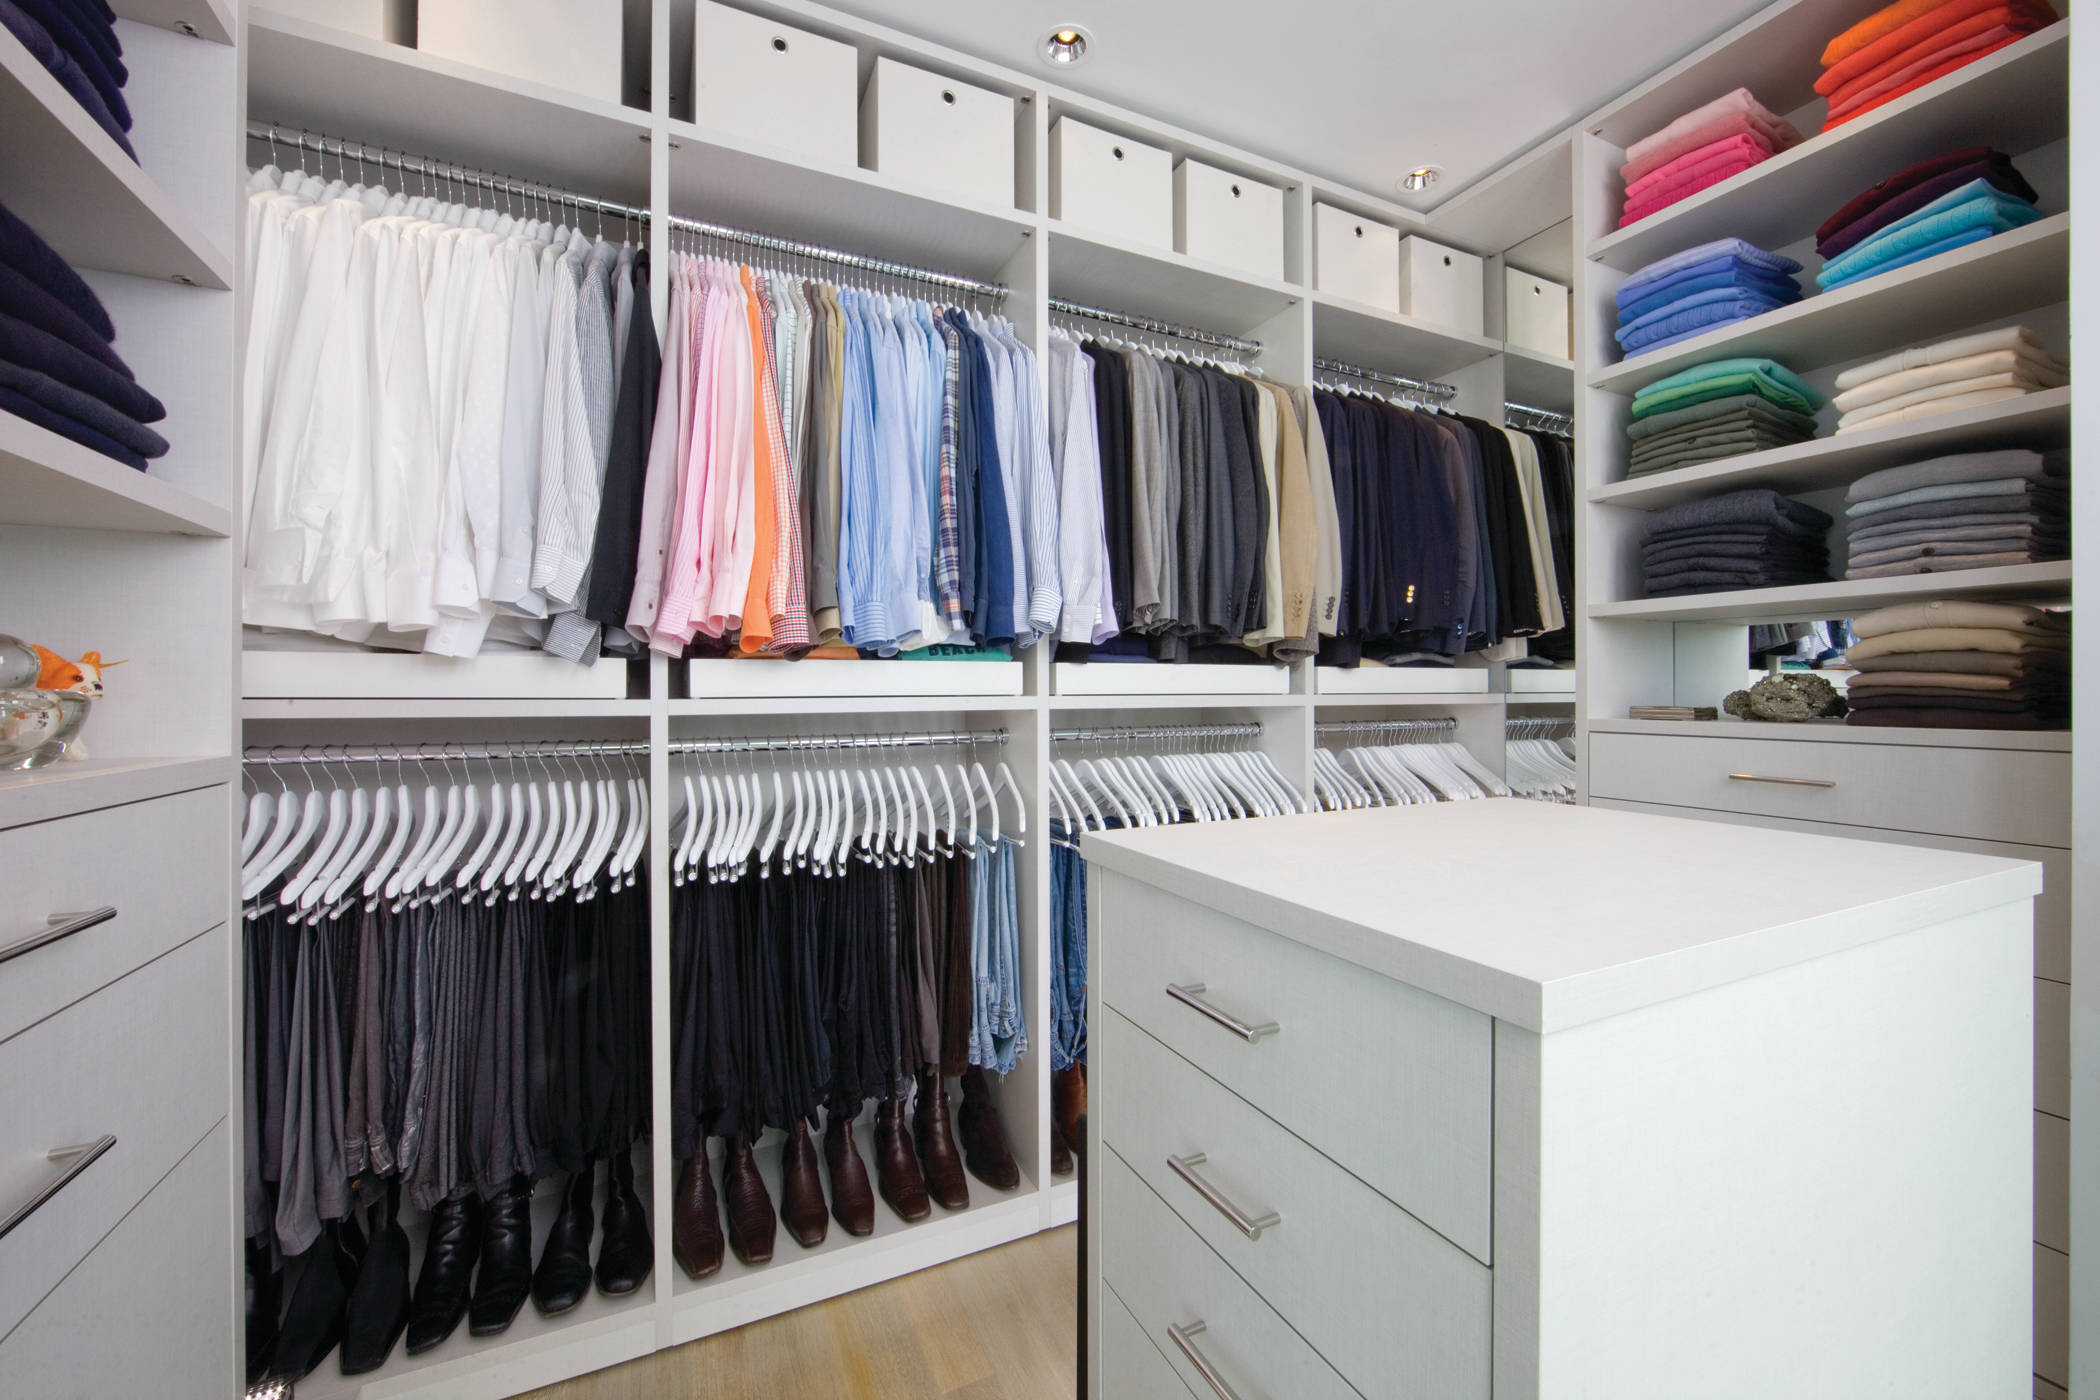 How to design a walk-in closet in small space – Contemporary Closets